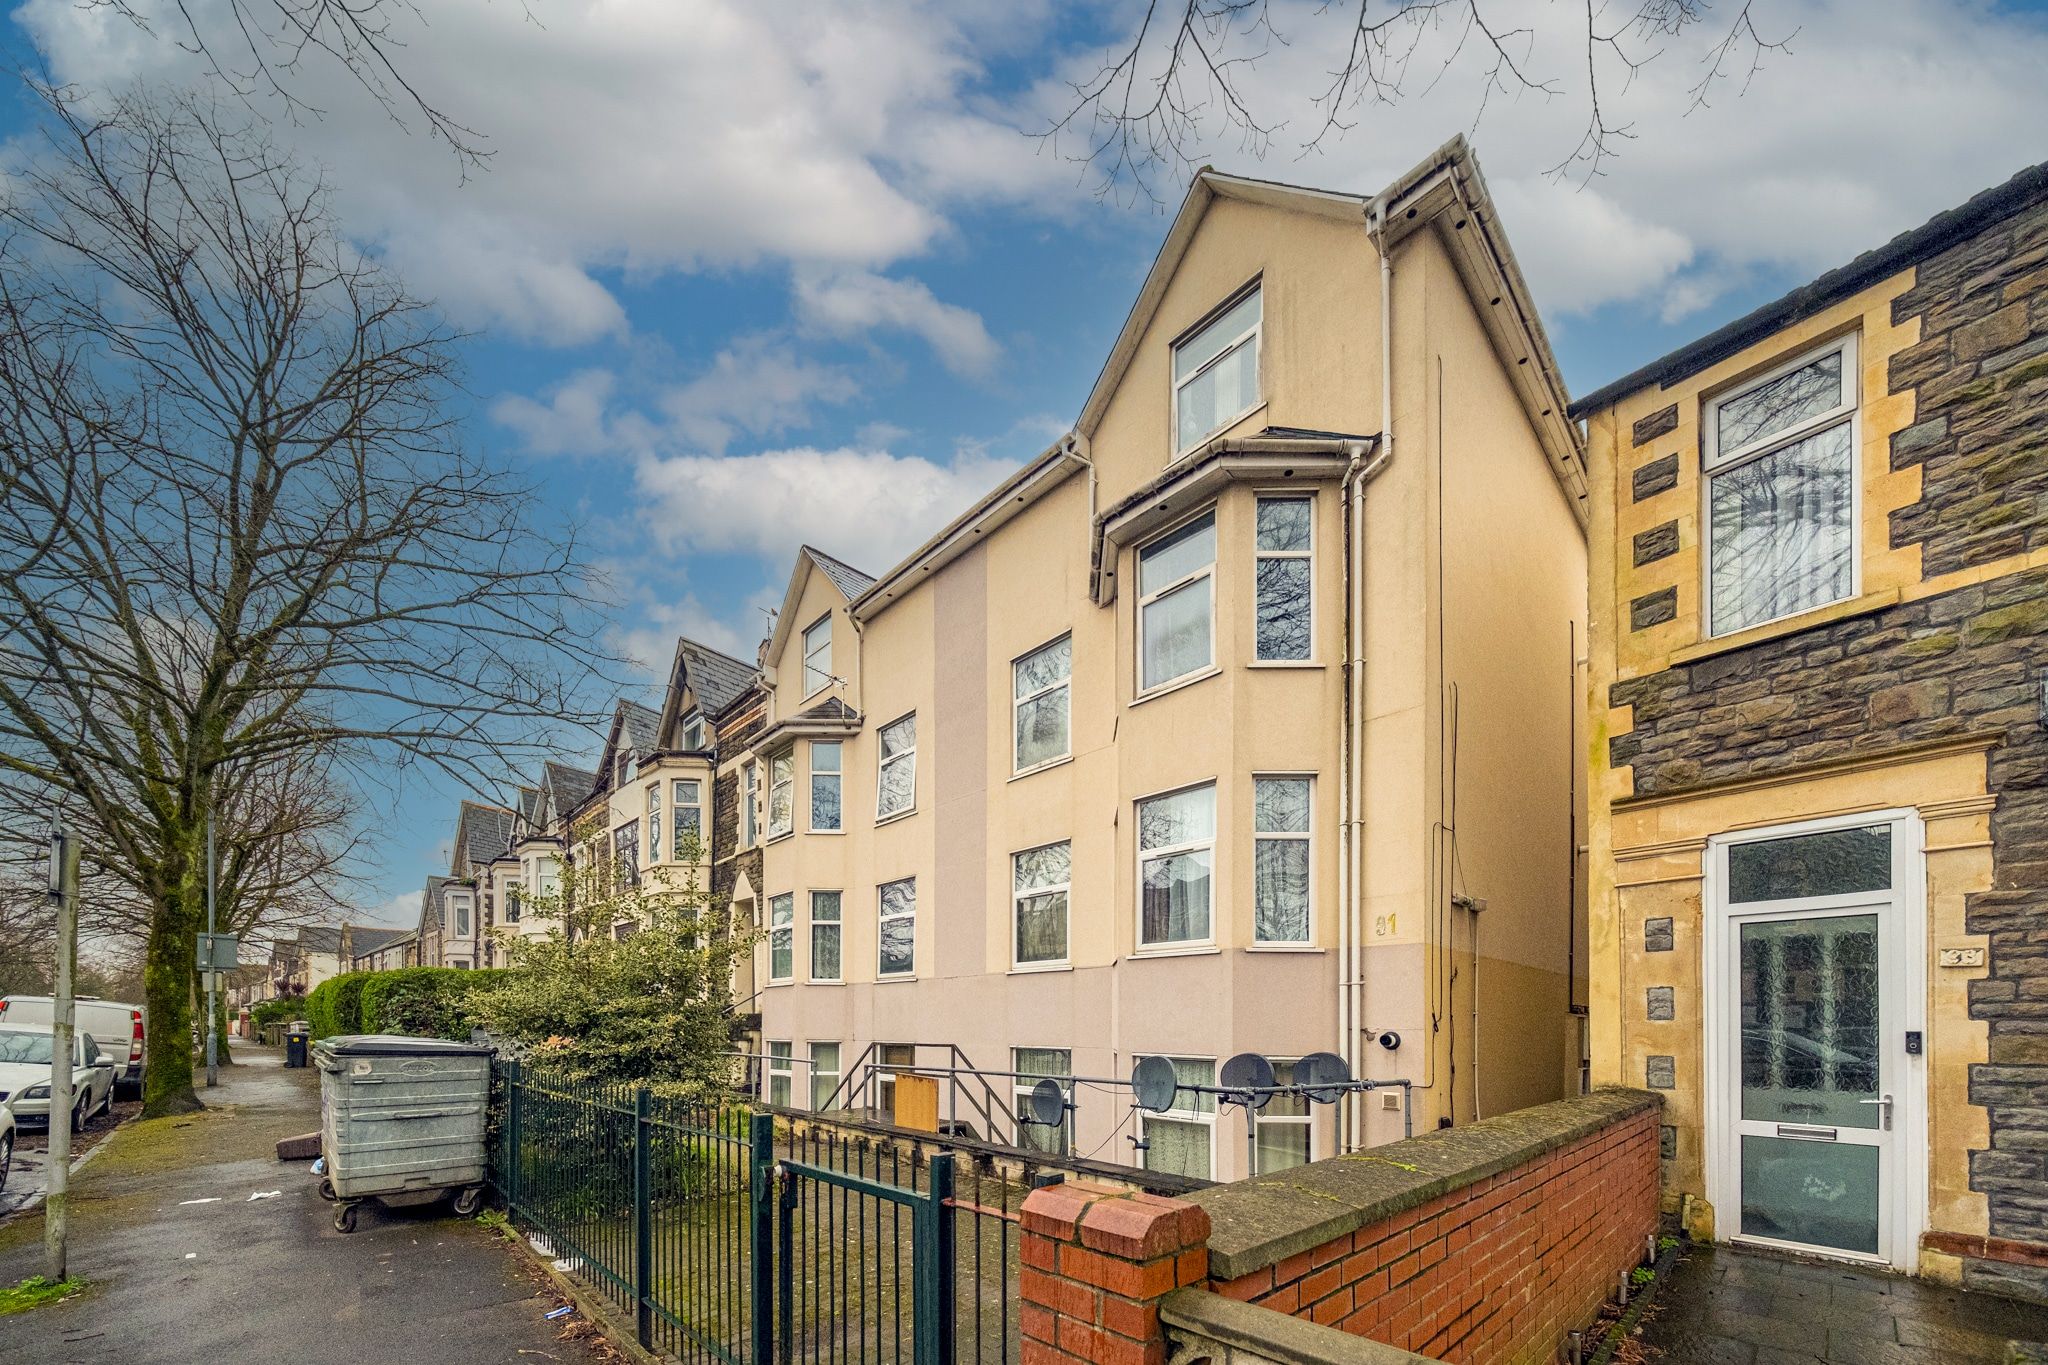 Stacey Court, Stacey Road, Cardiff, Cardiff, CF24 1DT